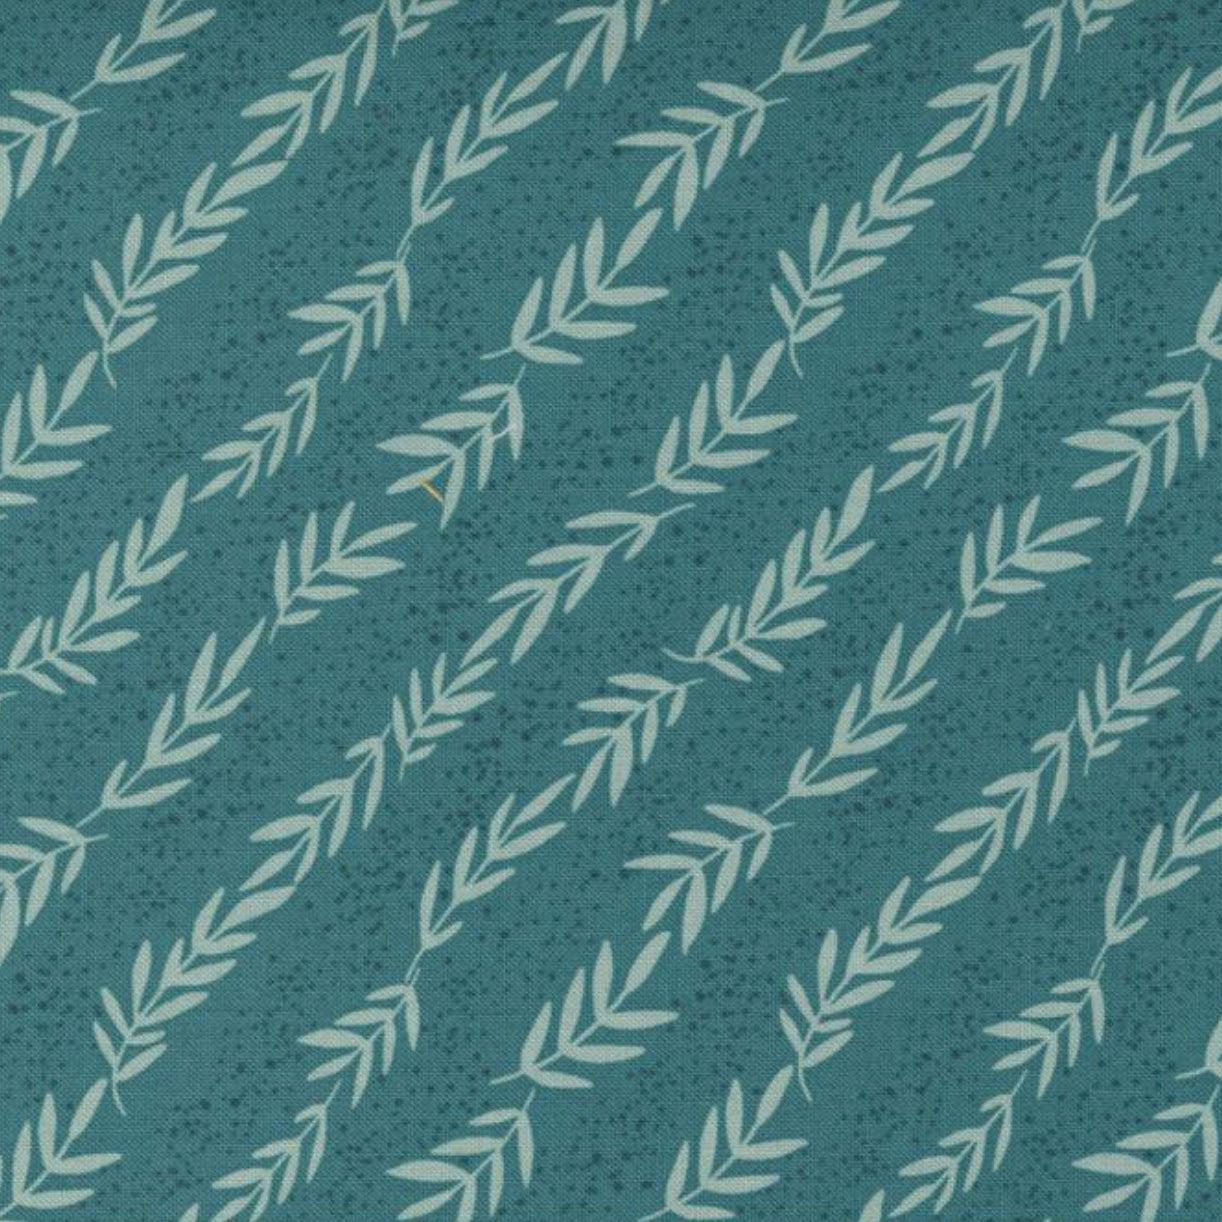 Songbook A New Page Dark Teal Reaching Stripes Leaf Fabric – End of Bolt – 39″ × 44/45″